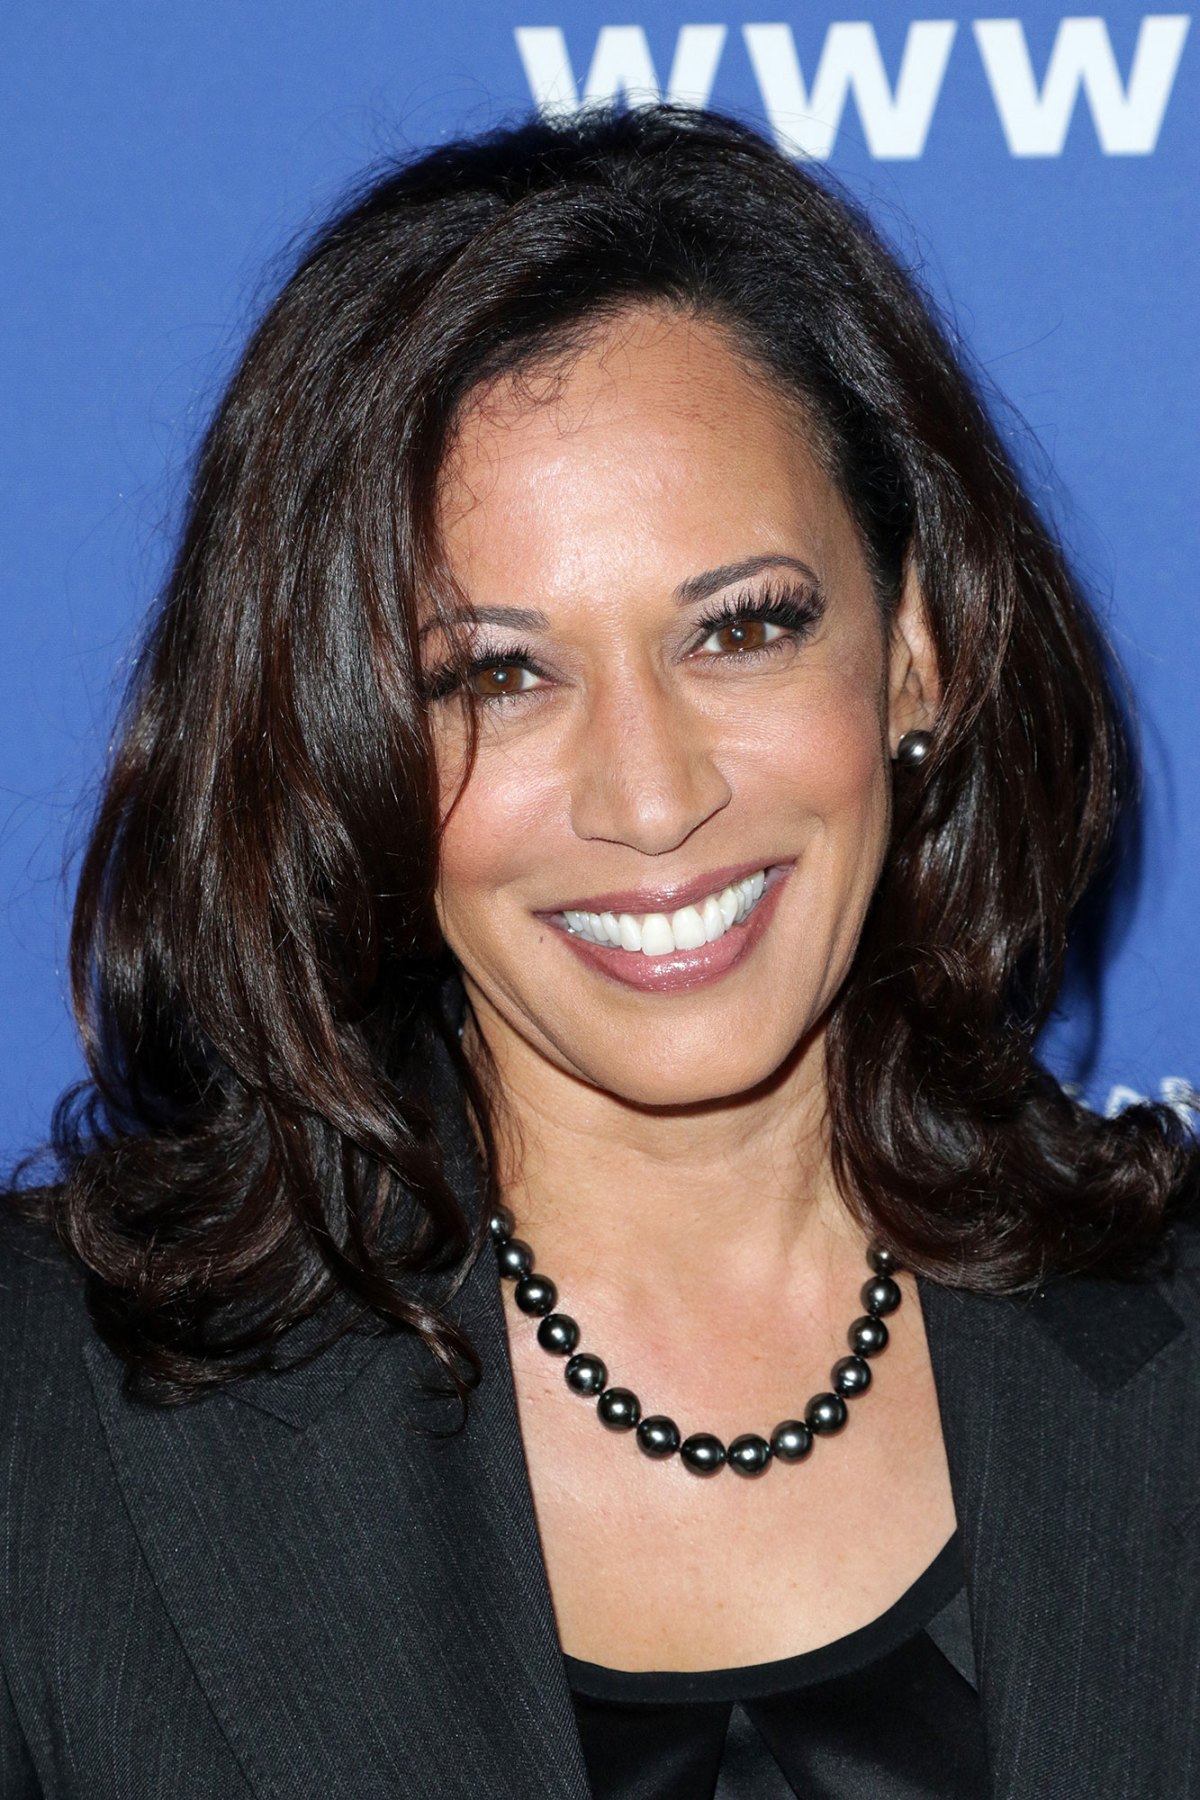 Kamala Harris: 5 Things to Know About the Future Vice President